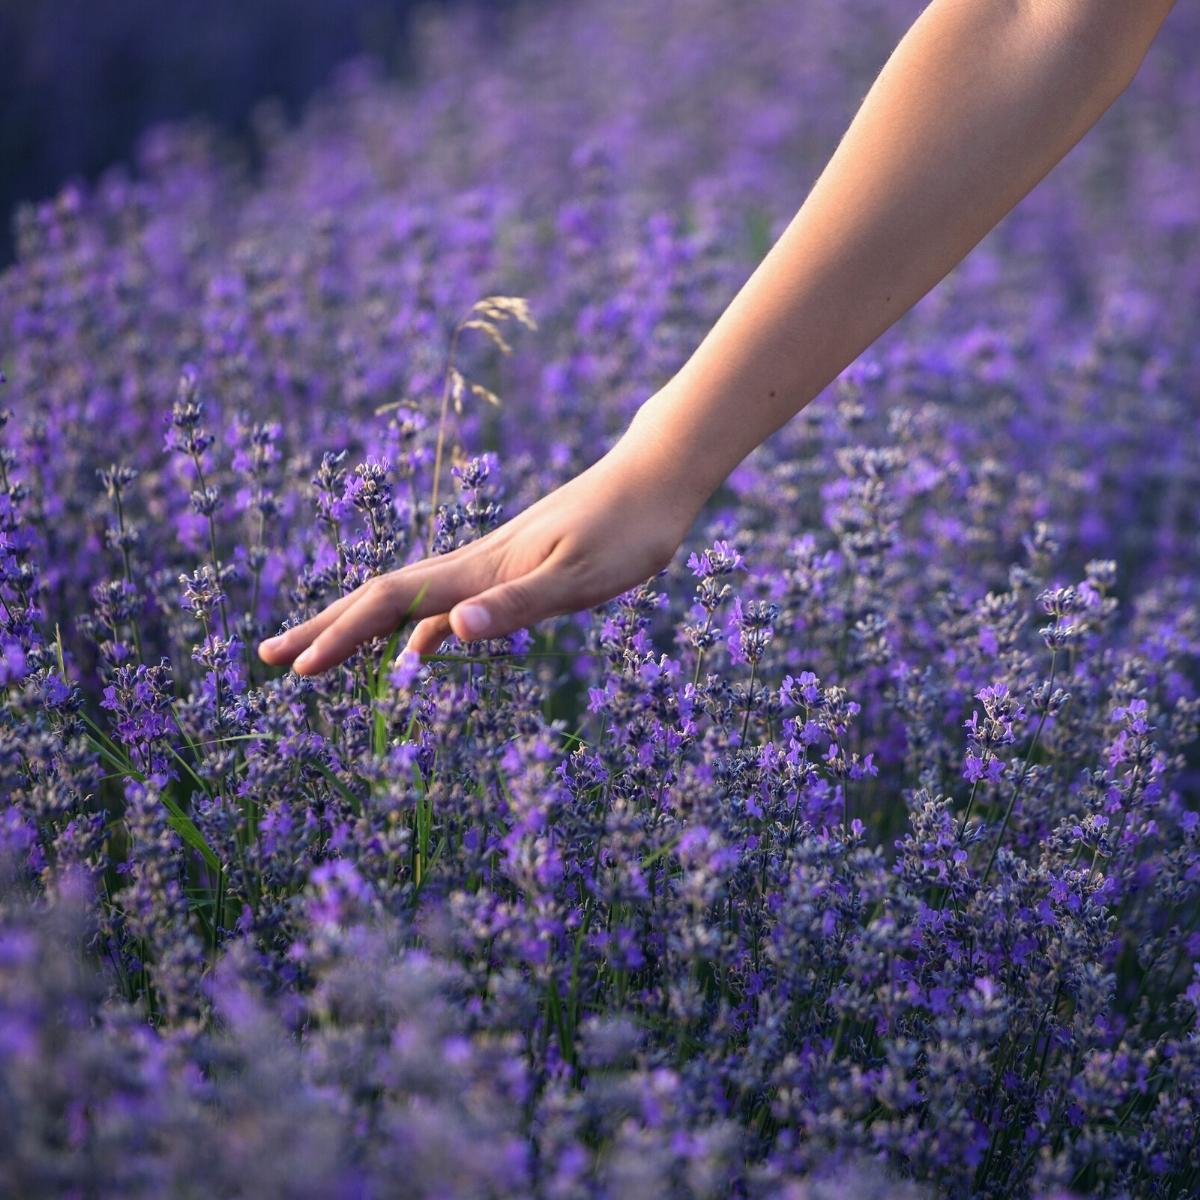 A hand running over a crop of lavender flowers in a field of purple.